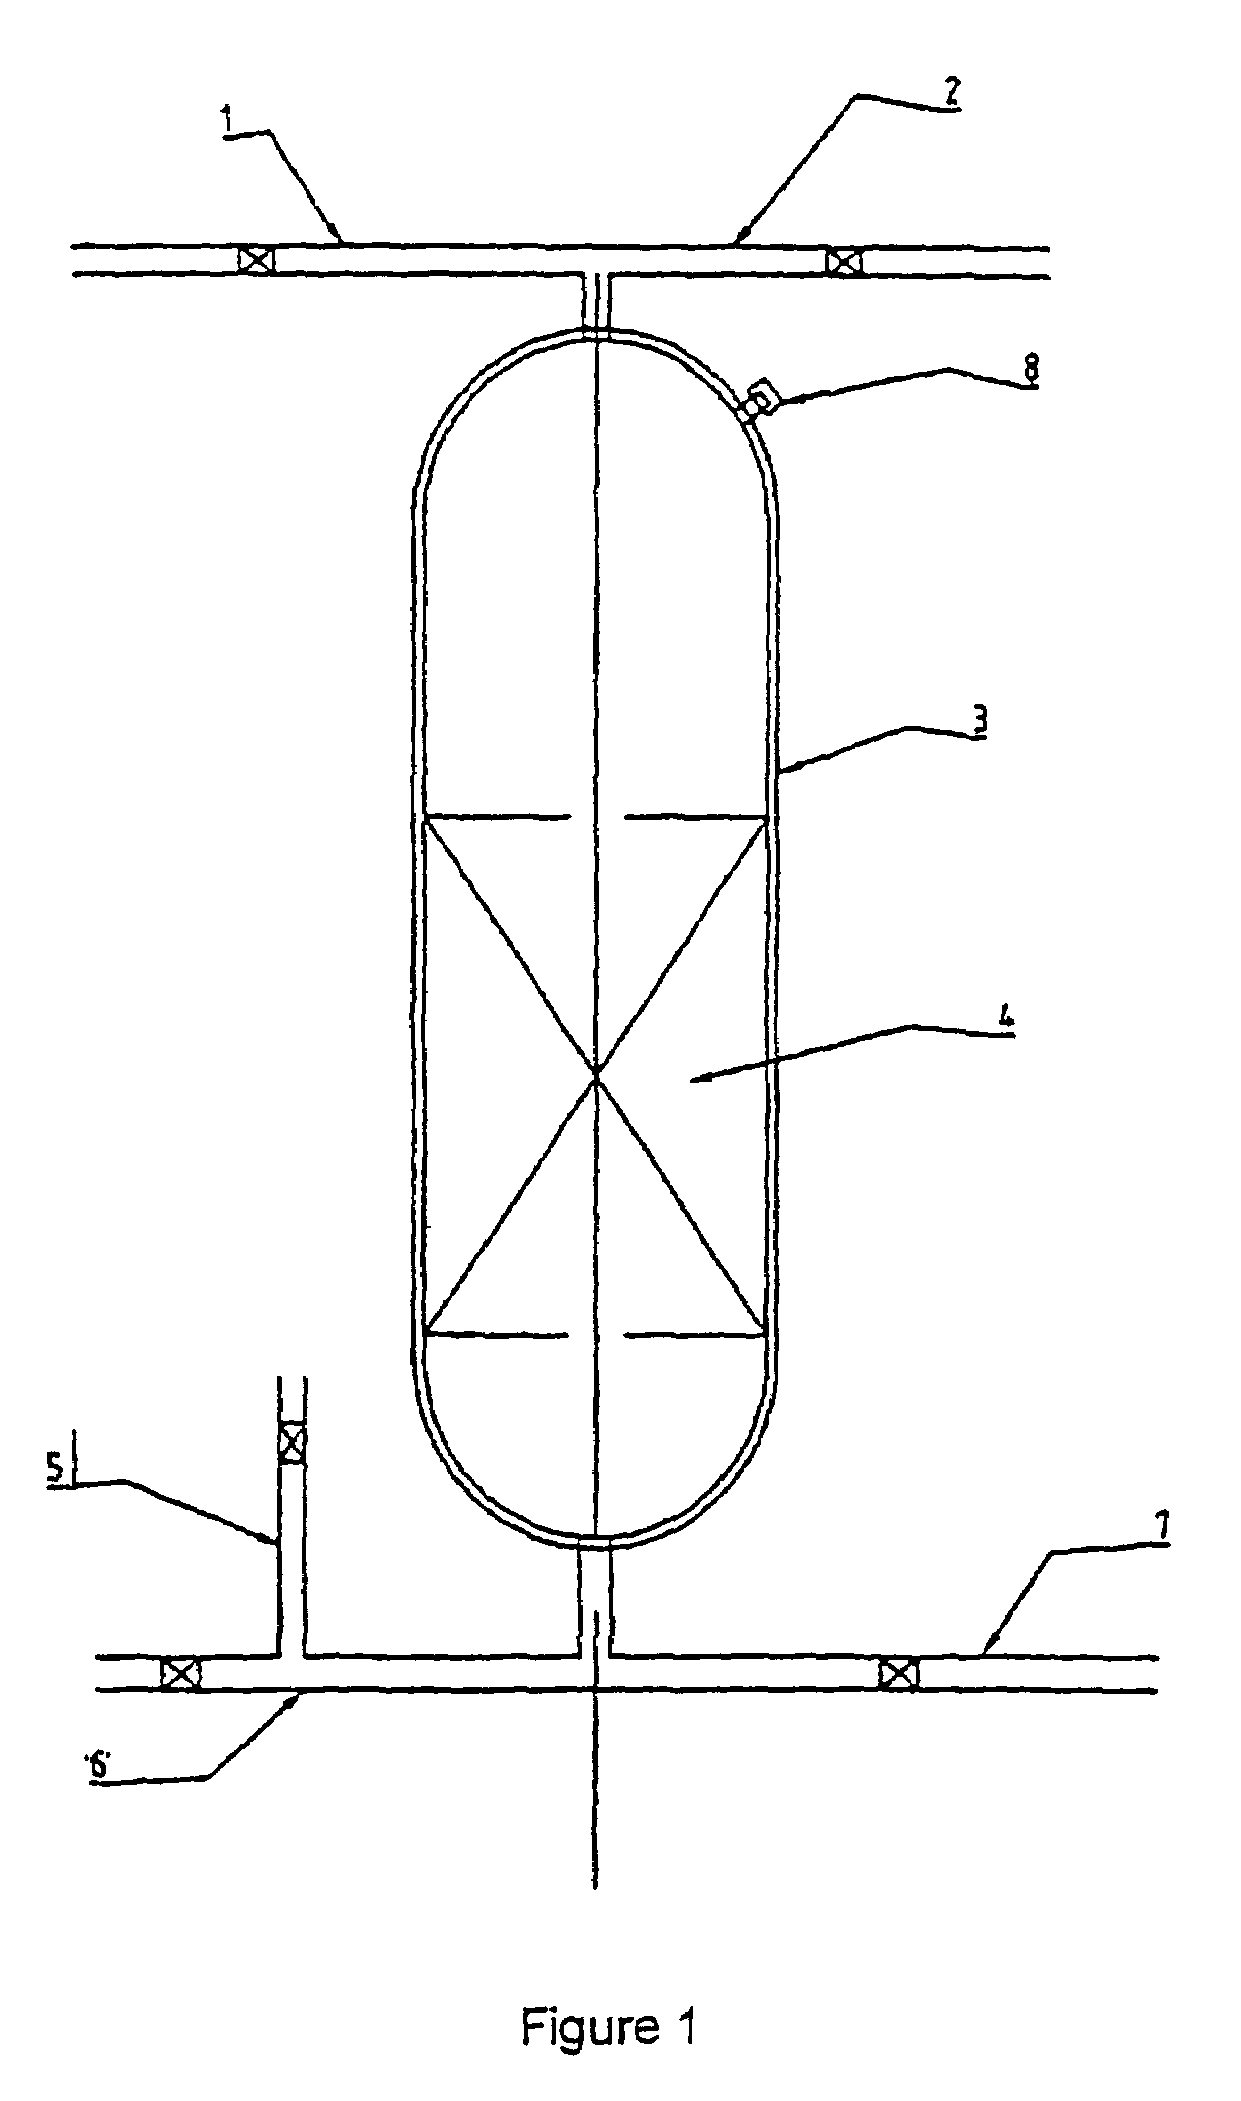 Pore size controllable filter